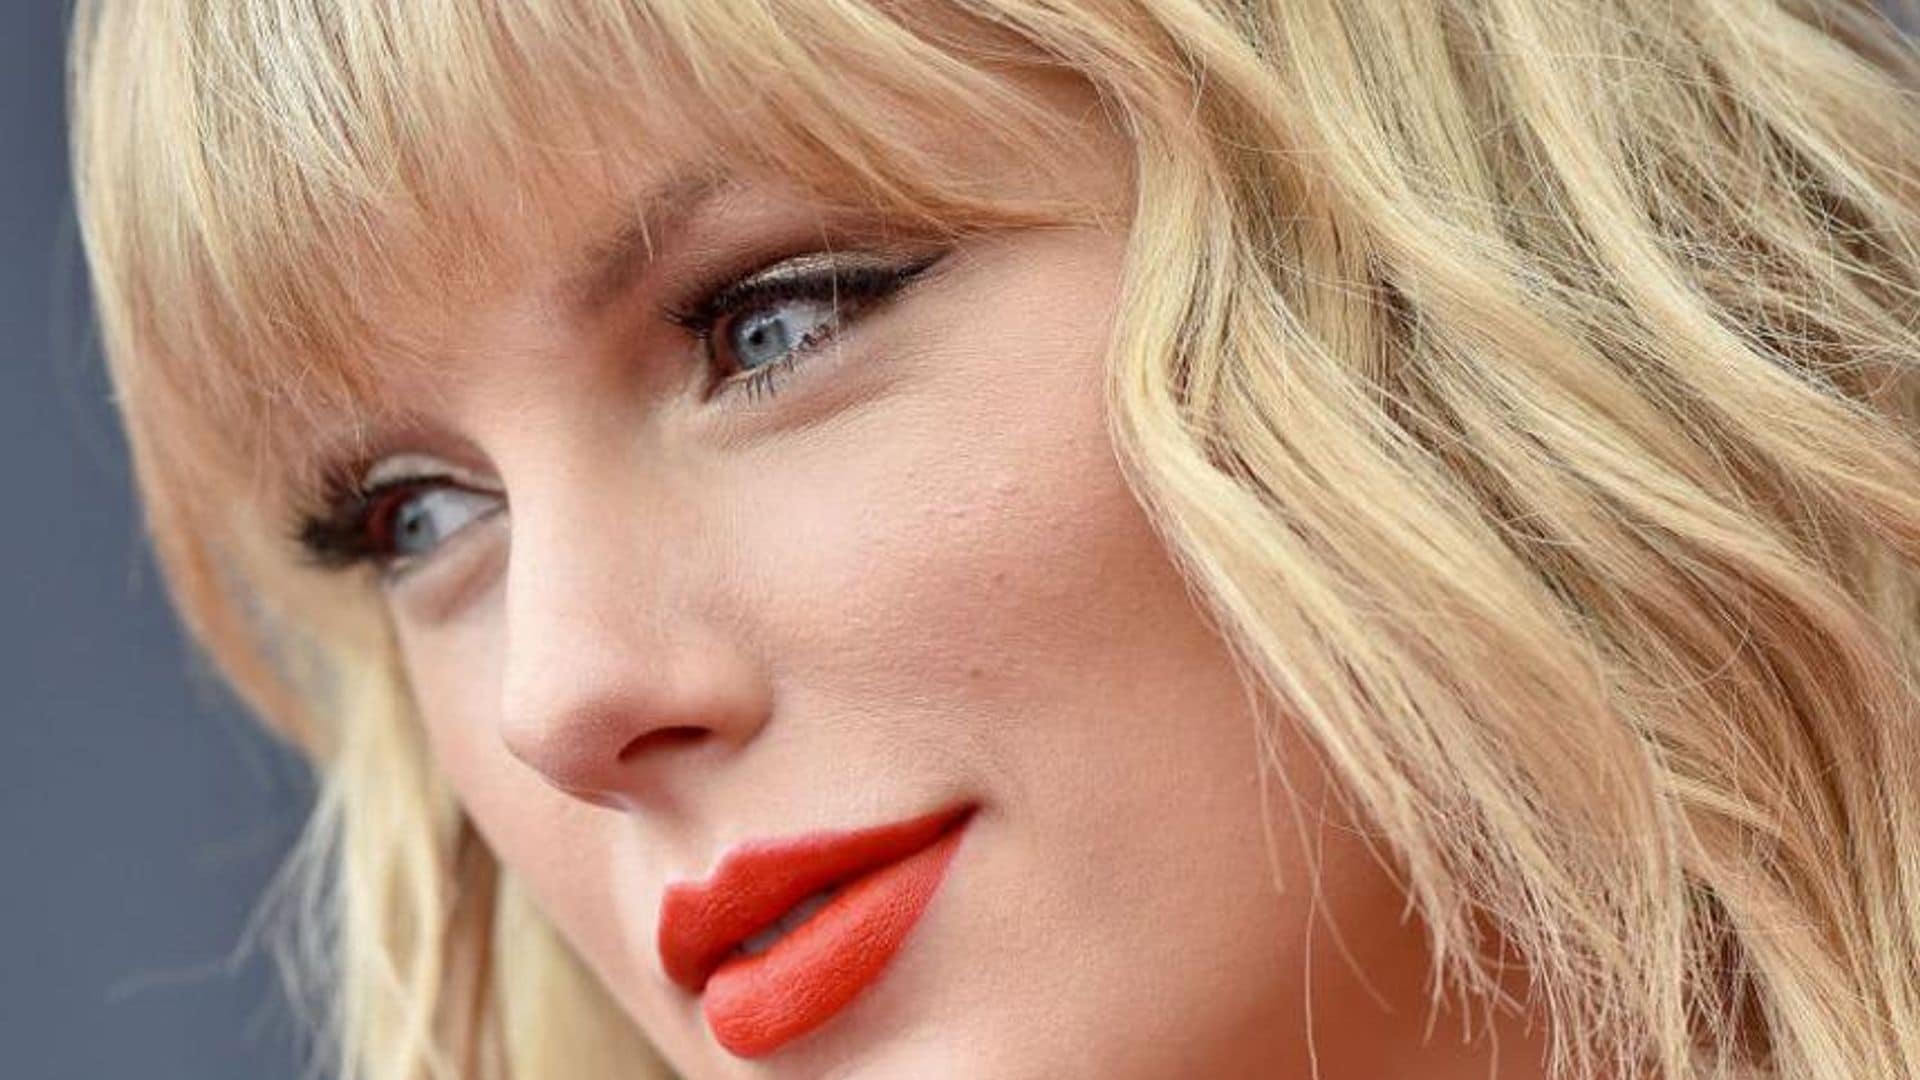 Taylor Swift adores a classic makeup with vibrant red lips